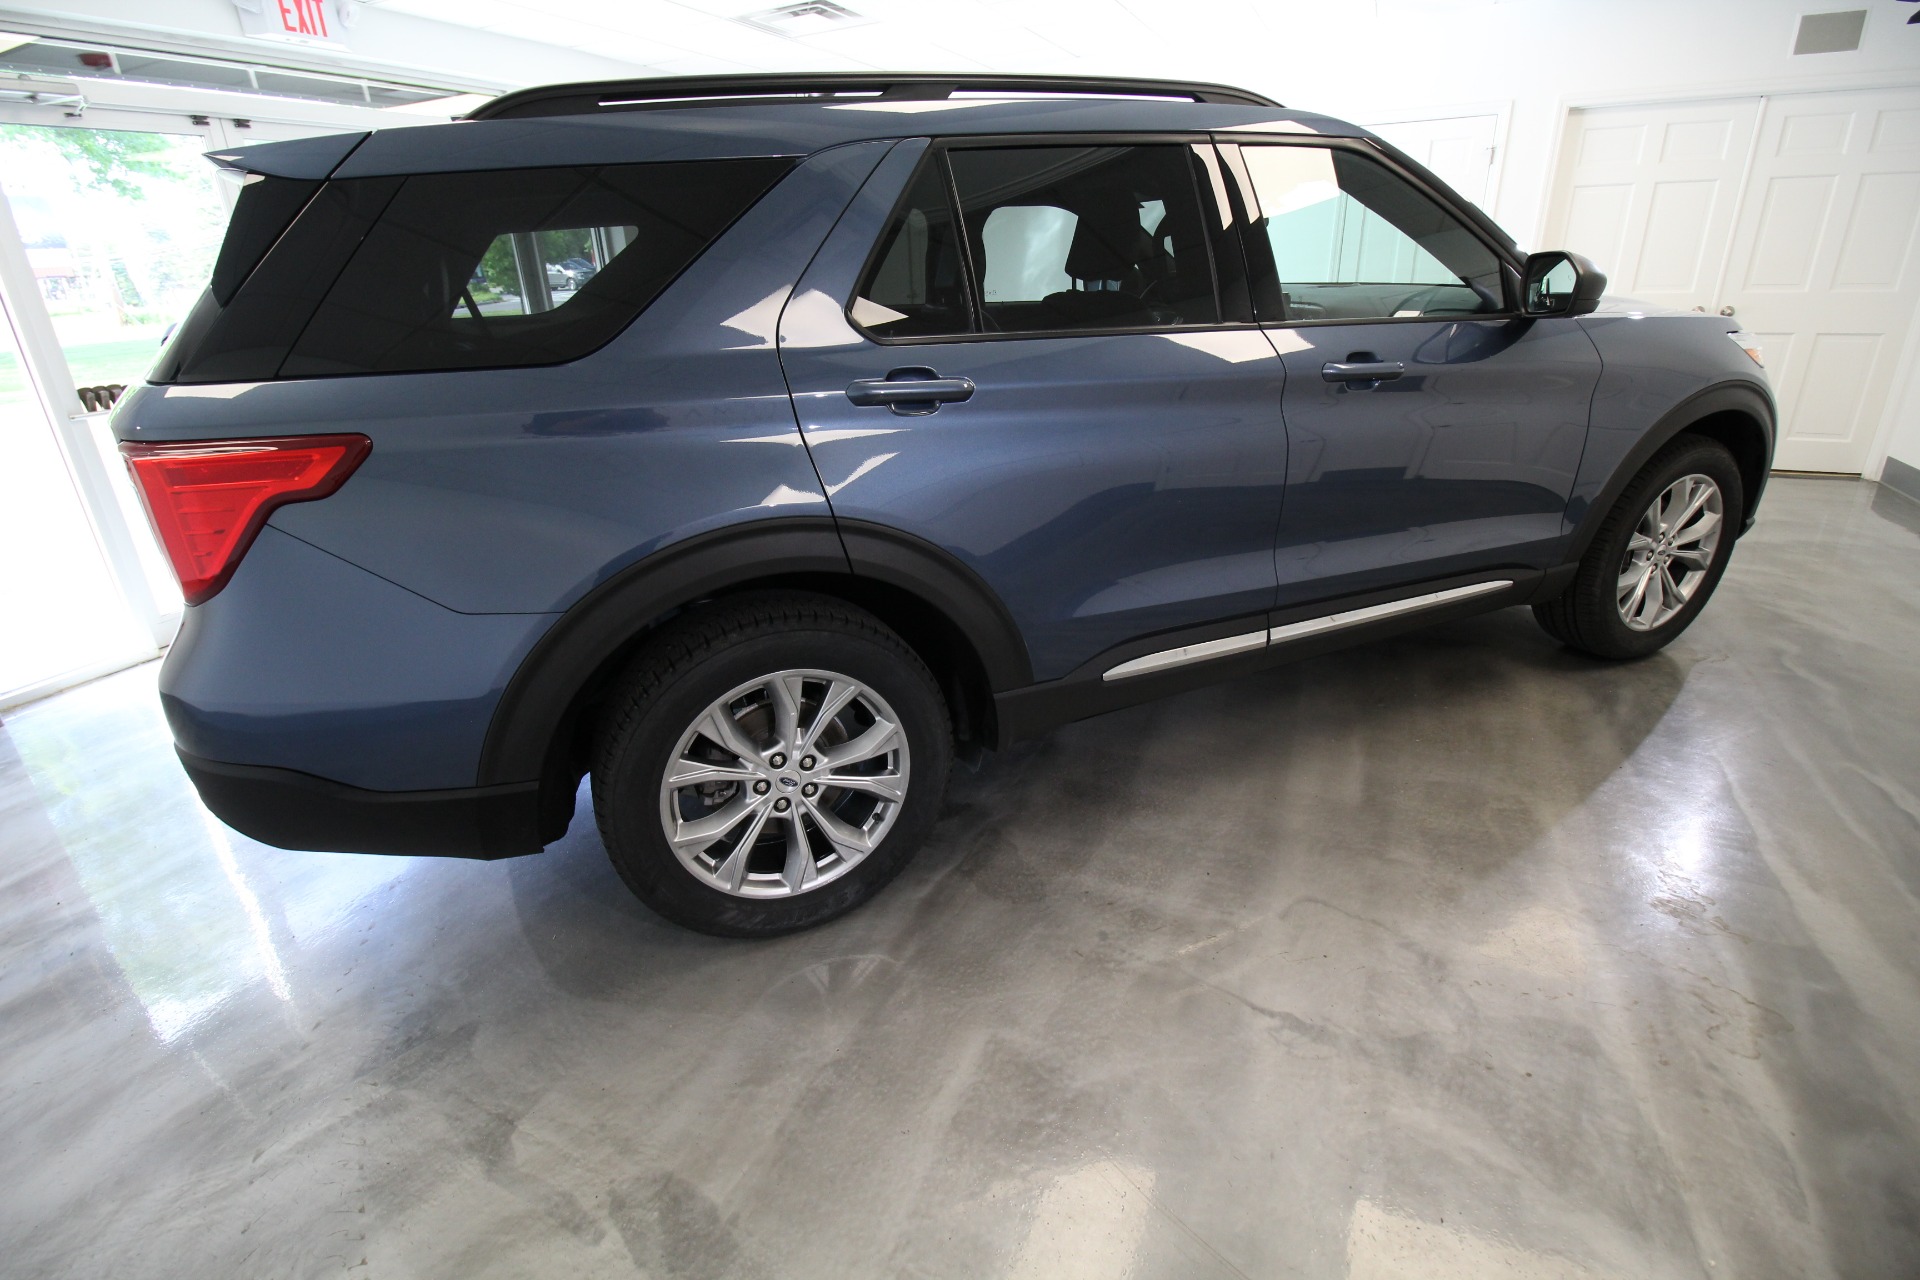 Used 2020 BLUE Ford Explorer XLT AWD LOCAL TRADE SUPERB CONDITION | Albany, NY